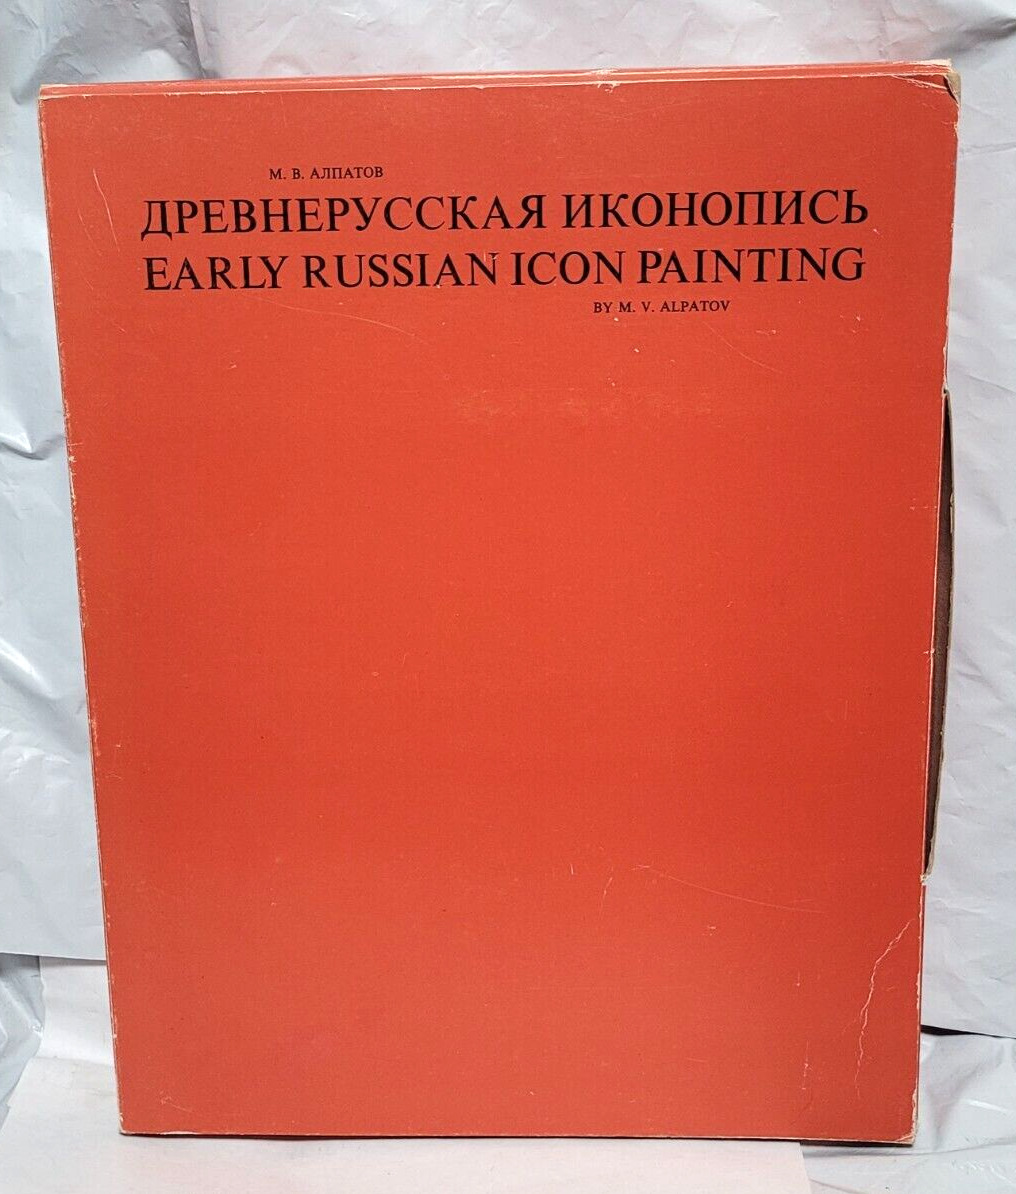 1974 / 1984  VTG RUSSIAN / ENGLISH HARDCOVER BOOK – EARLY RUSSIAN ICON PAINTING